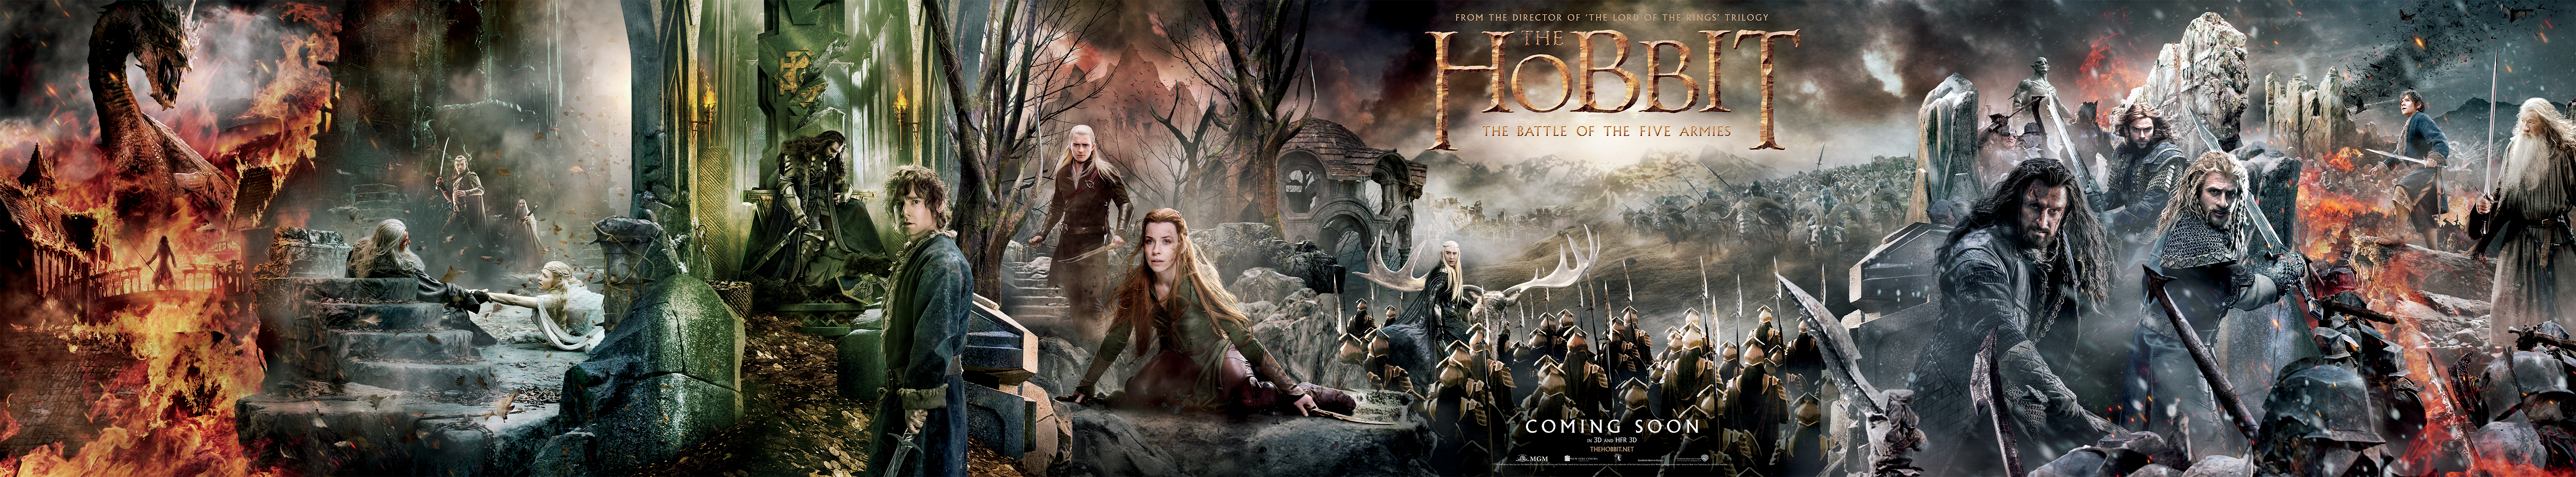 movies-the-hobbit-the-battle-of-the-five-armies-tapestry-artwork.jpg